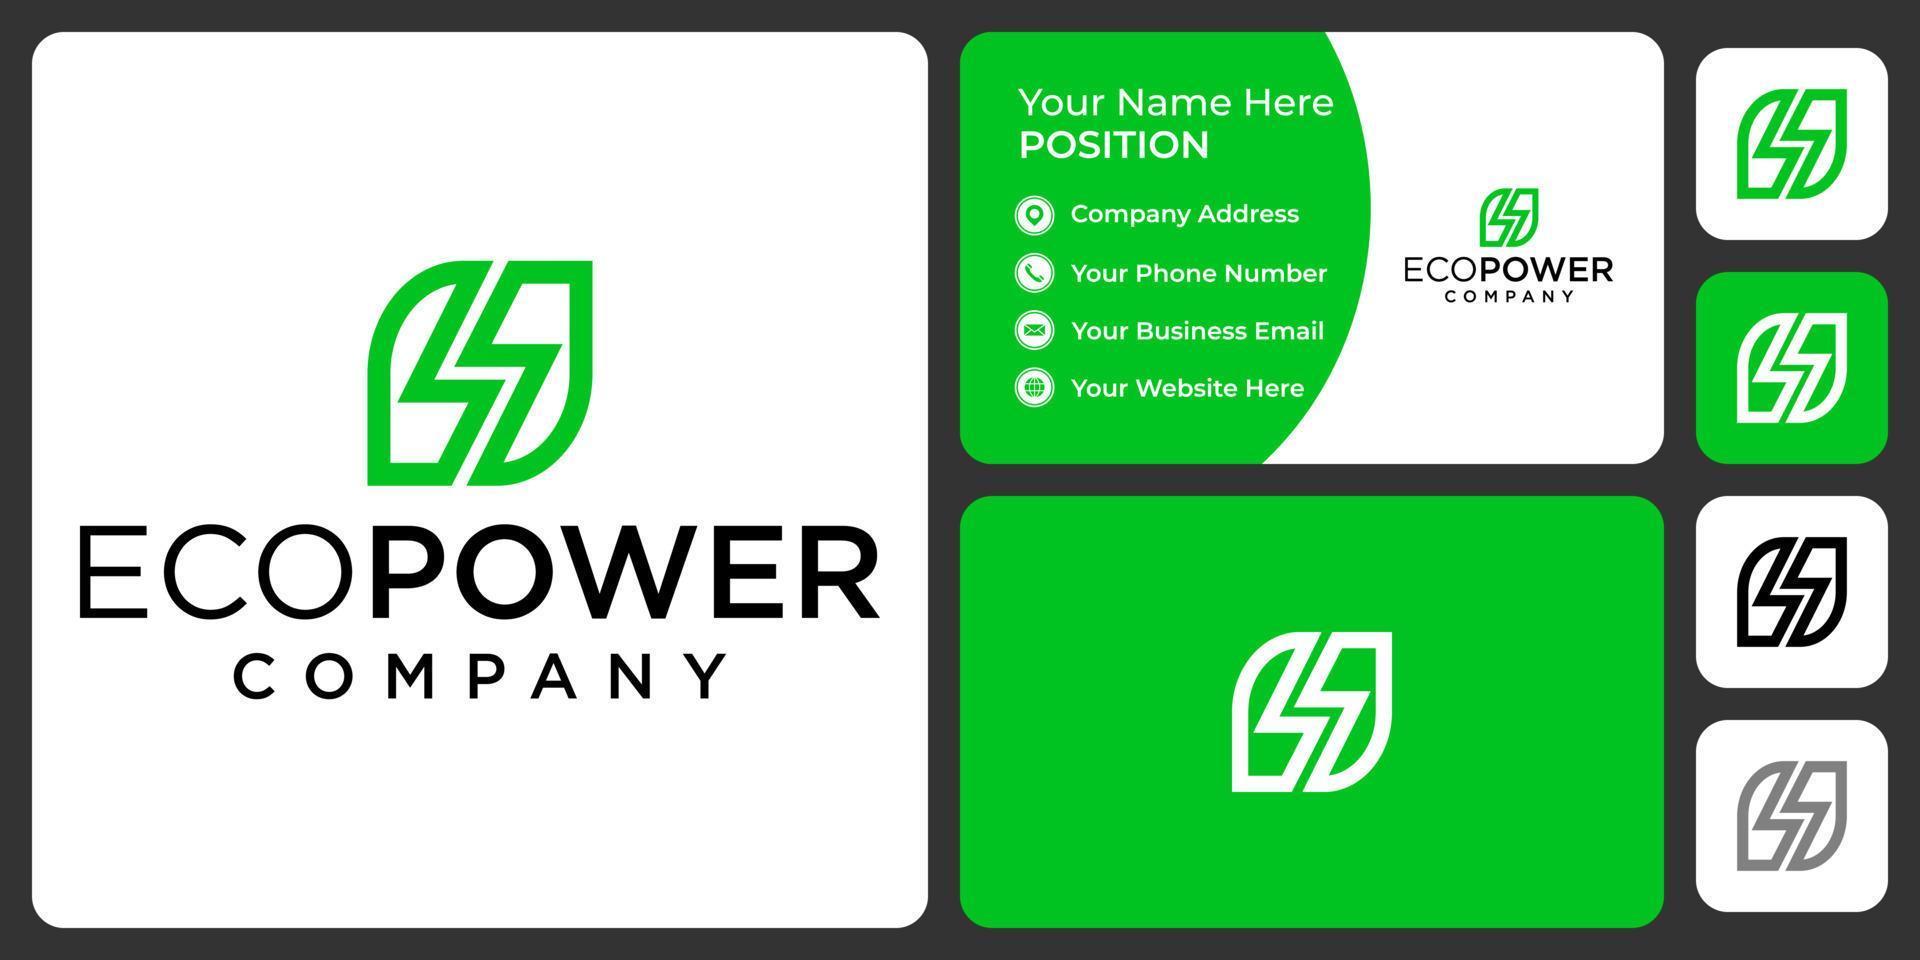 Eco power electric logo design with business card template. vector